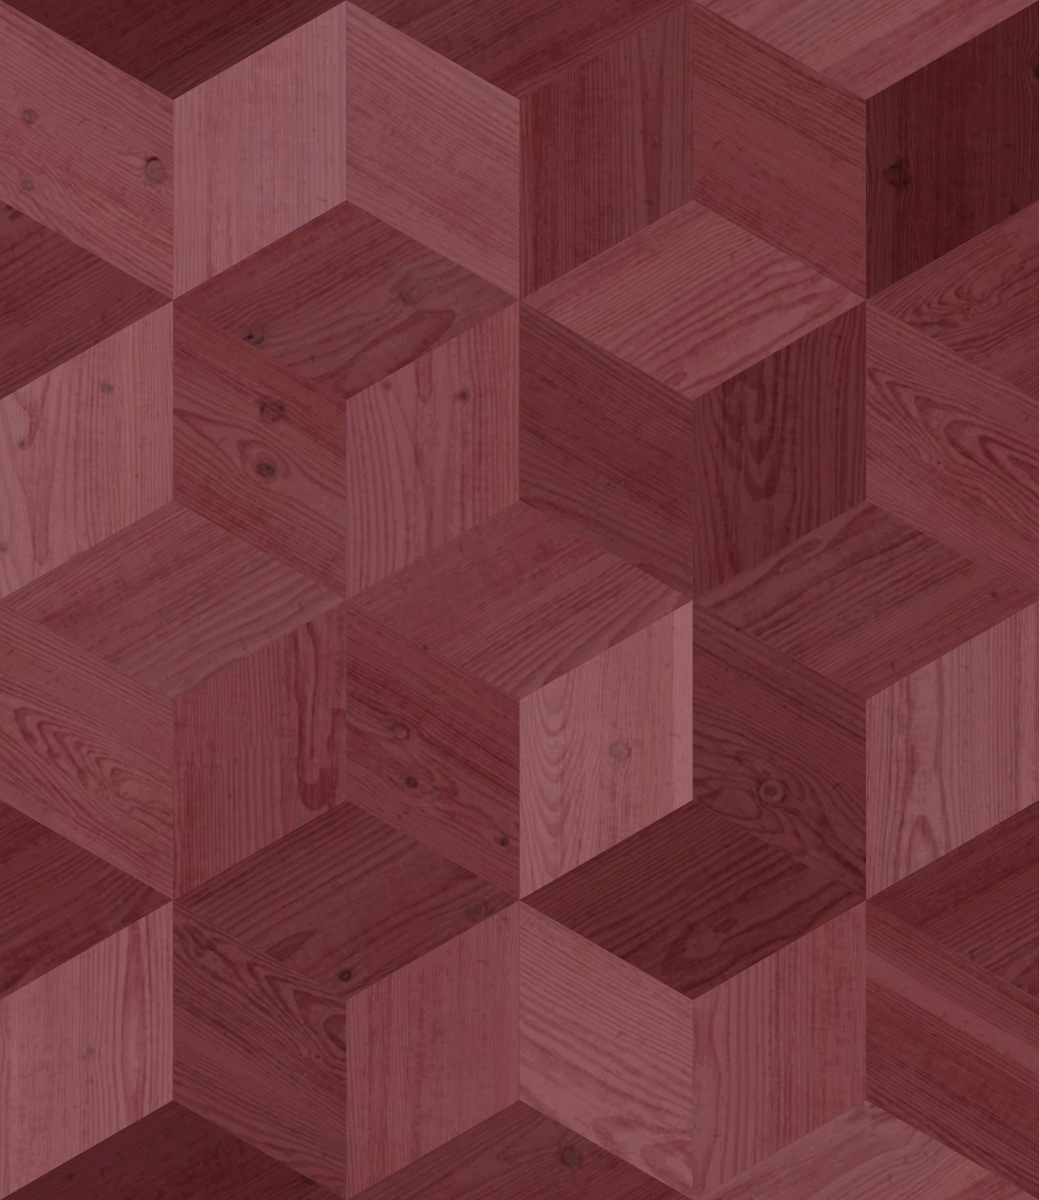 A seamless wood texture with purpleheart boards arranged in a Cubic pattern